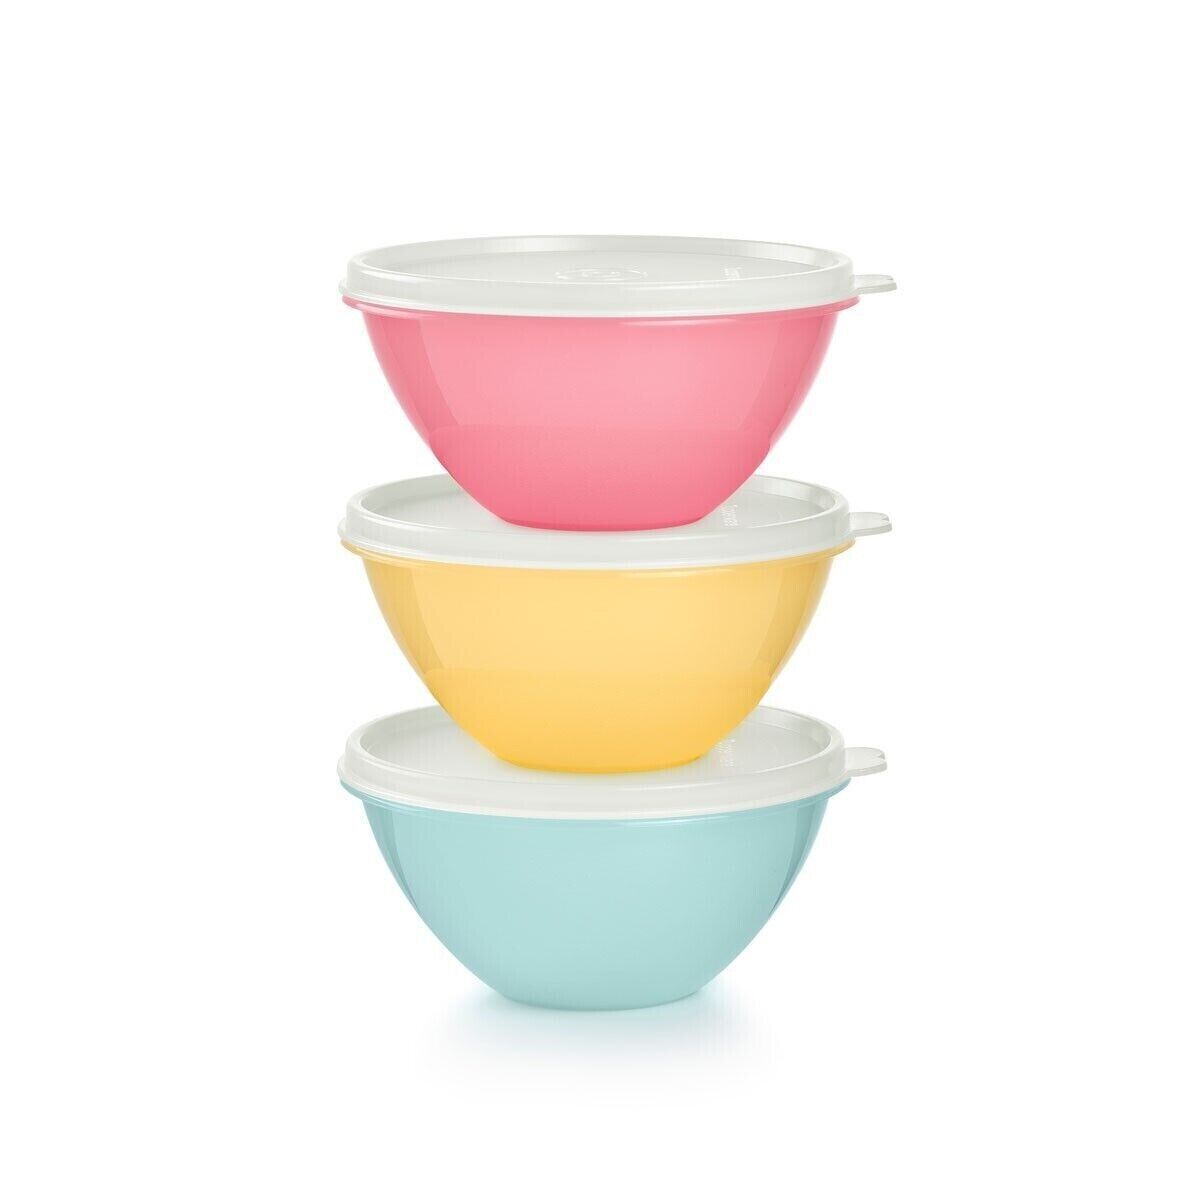 Tupperware Small Wonderlier 3Pc Bowl Set 2 Cup New